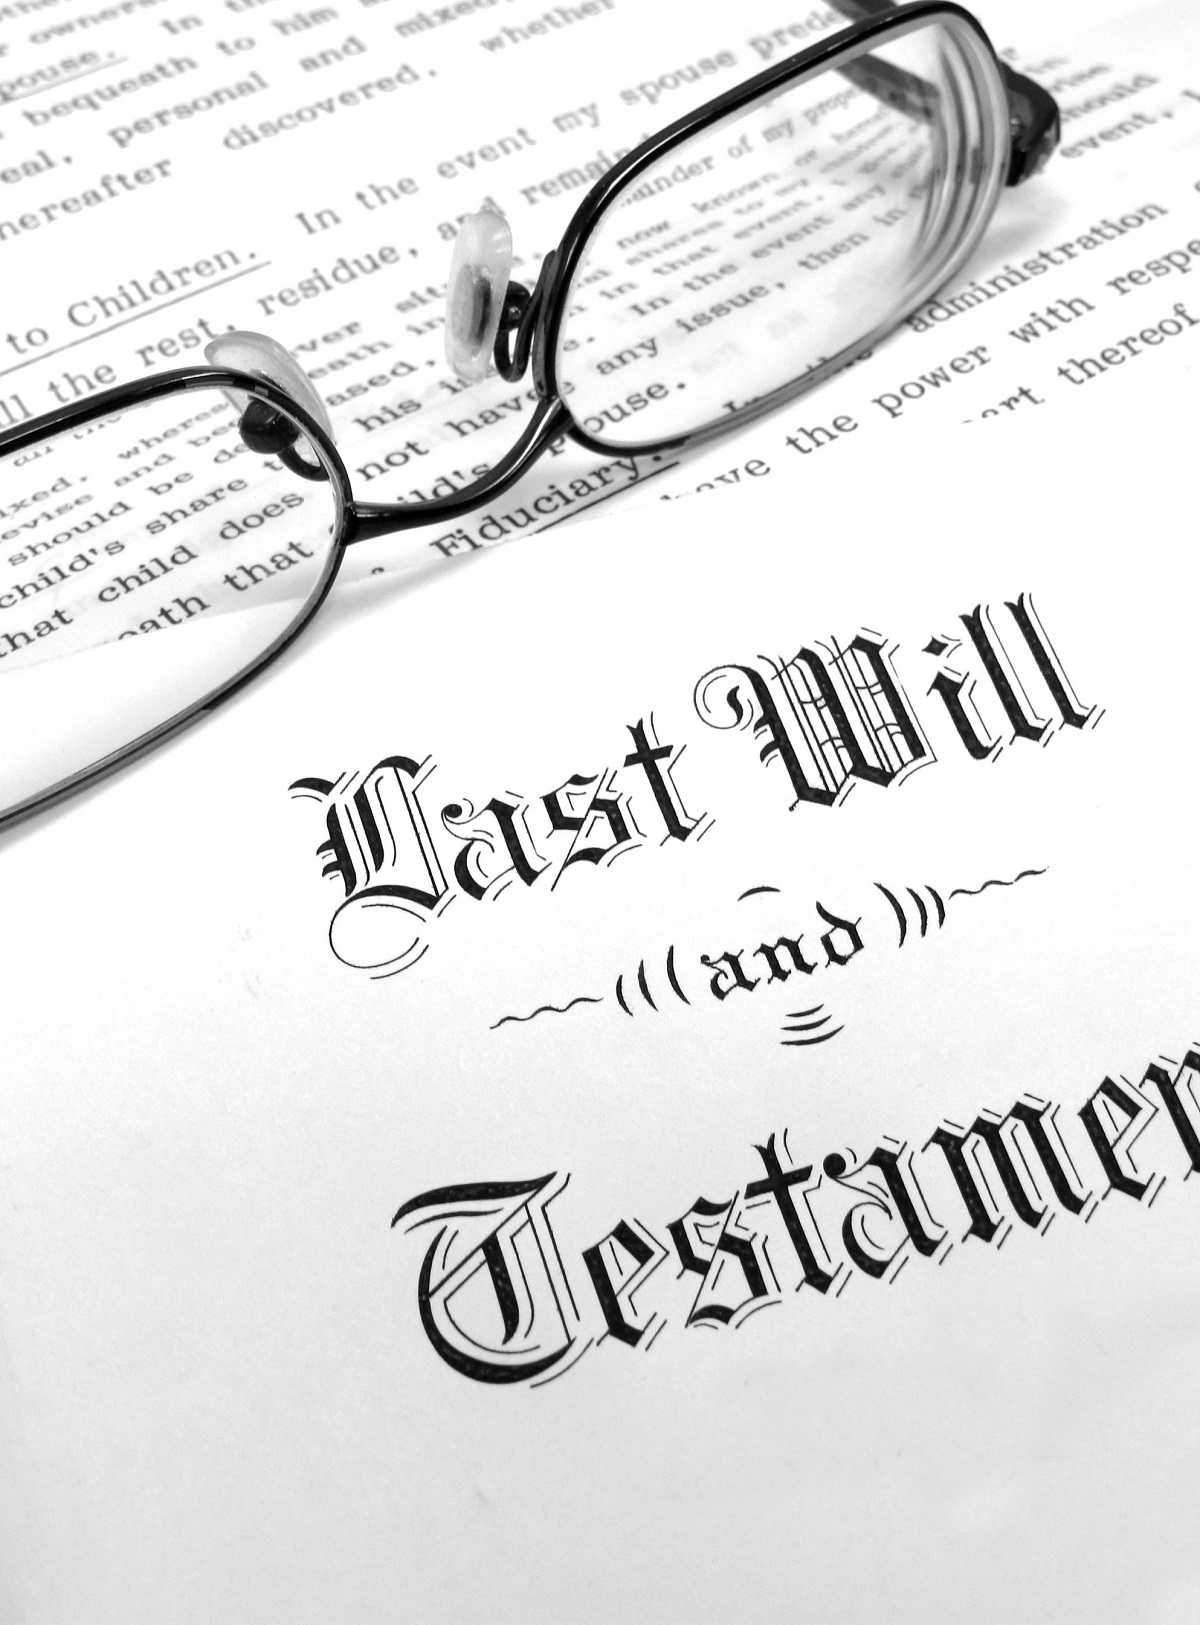 Envelope with Last Will and Testament